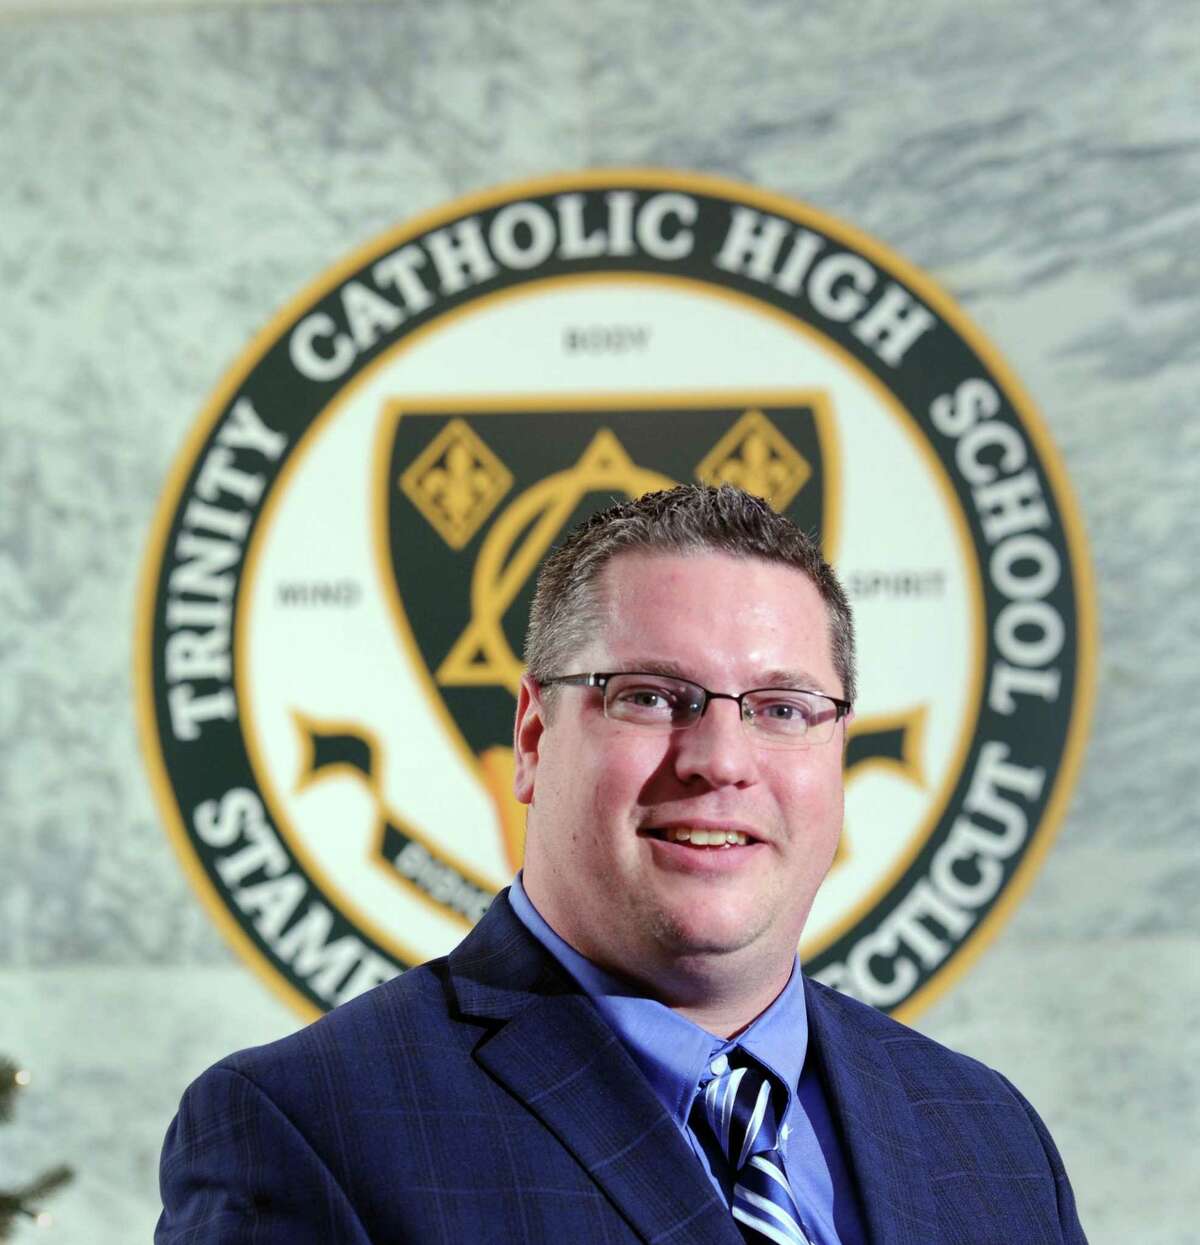 David Williams has left Trinity Catholic High School in Stamford, Conn. after serving one year as principal.